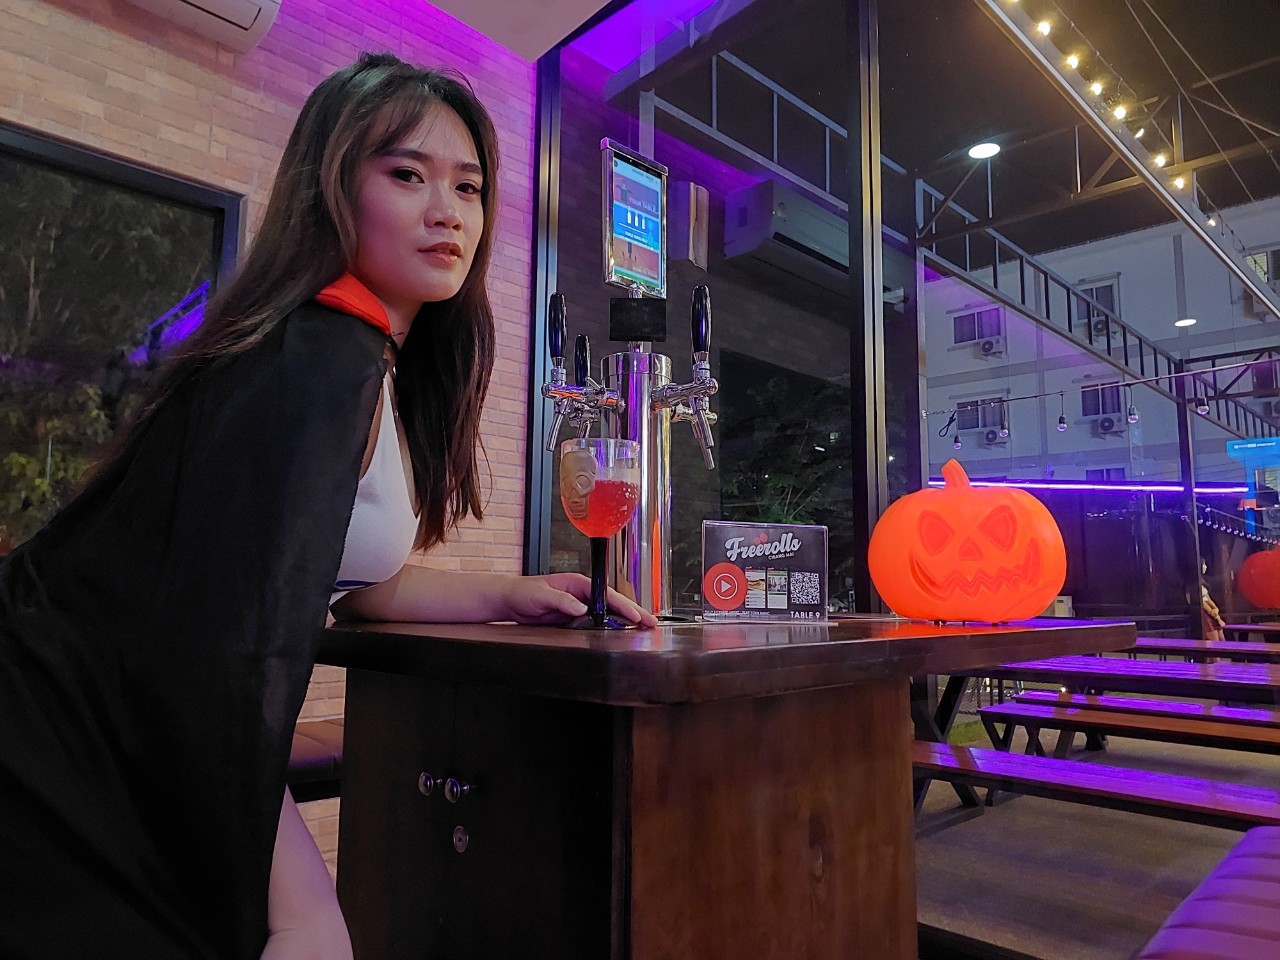 Experience a spooky Halloween in Chiang Mai